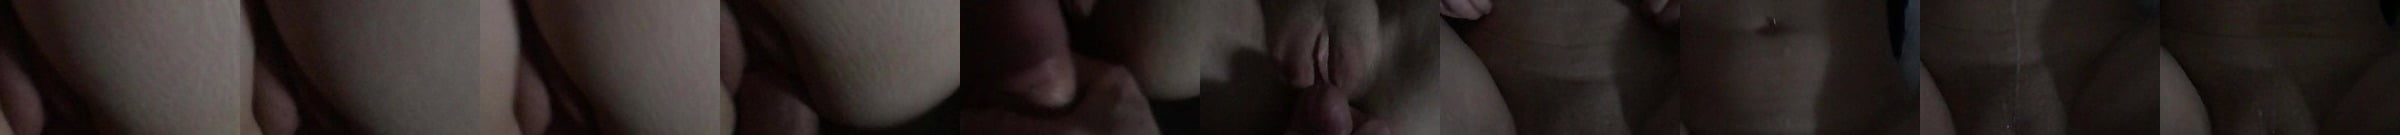 Featured Fuck My Wife Porn Videos Xhamster